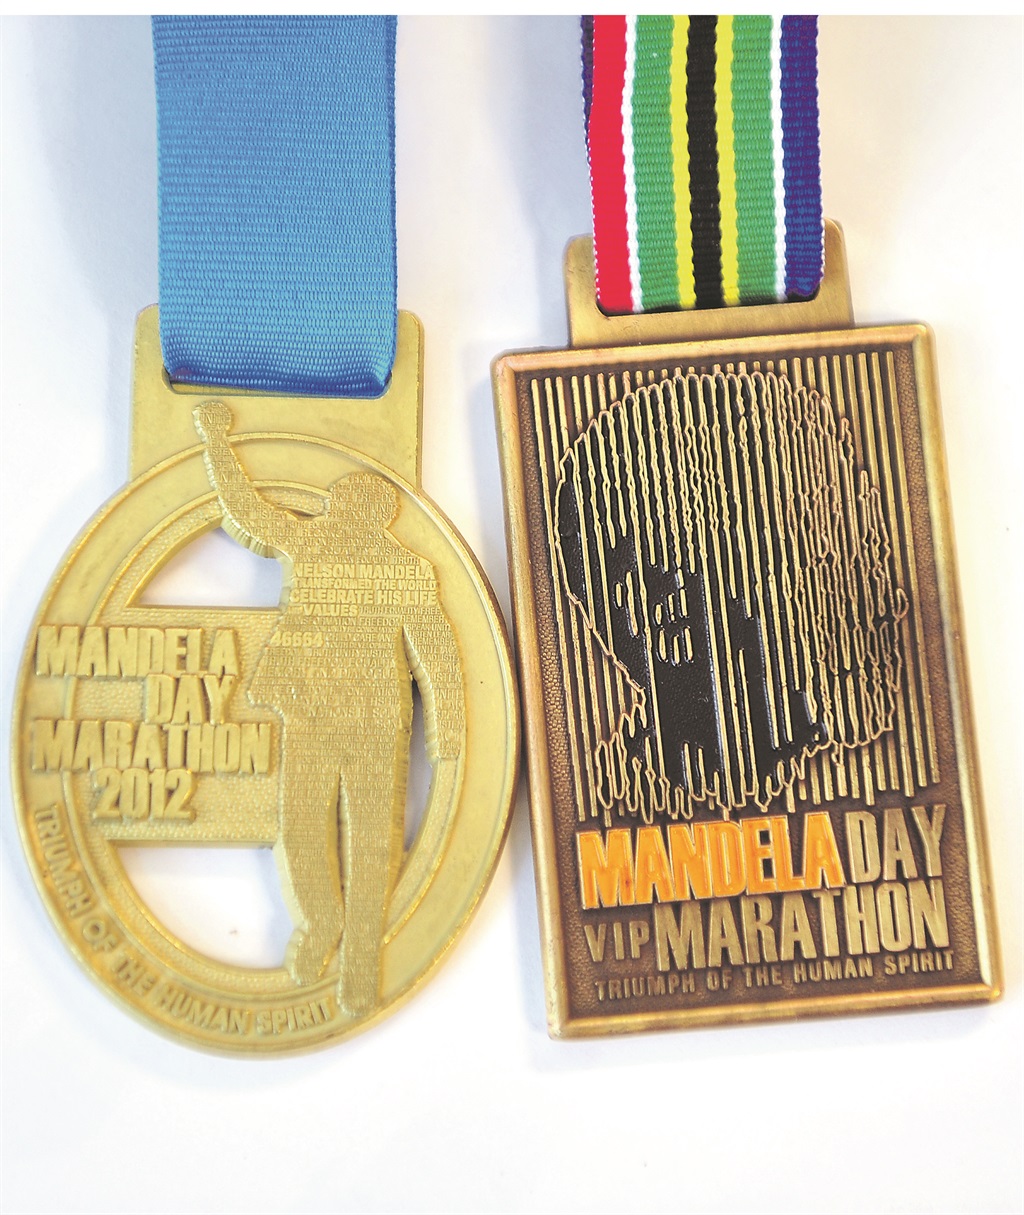 winners Medals that will be awarded at the running event PHOTO: LUCKY NXUMALO 